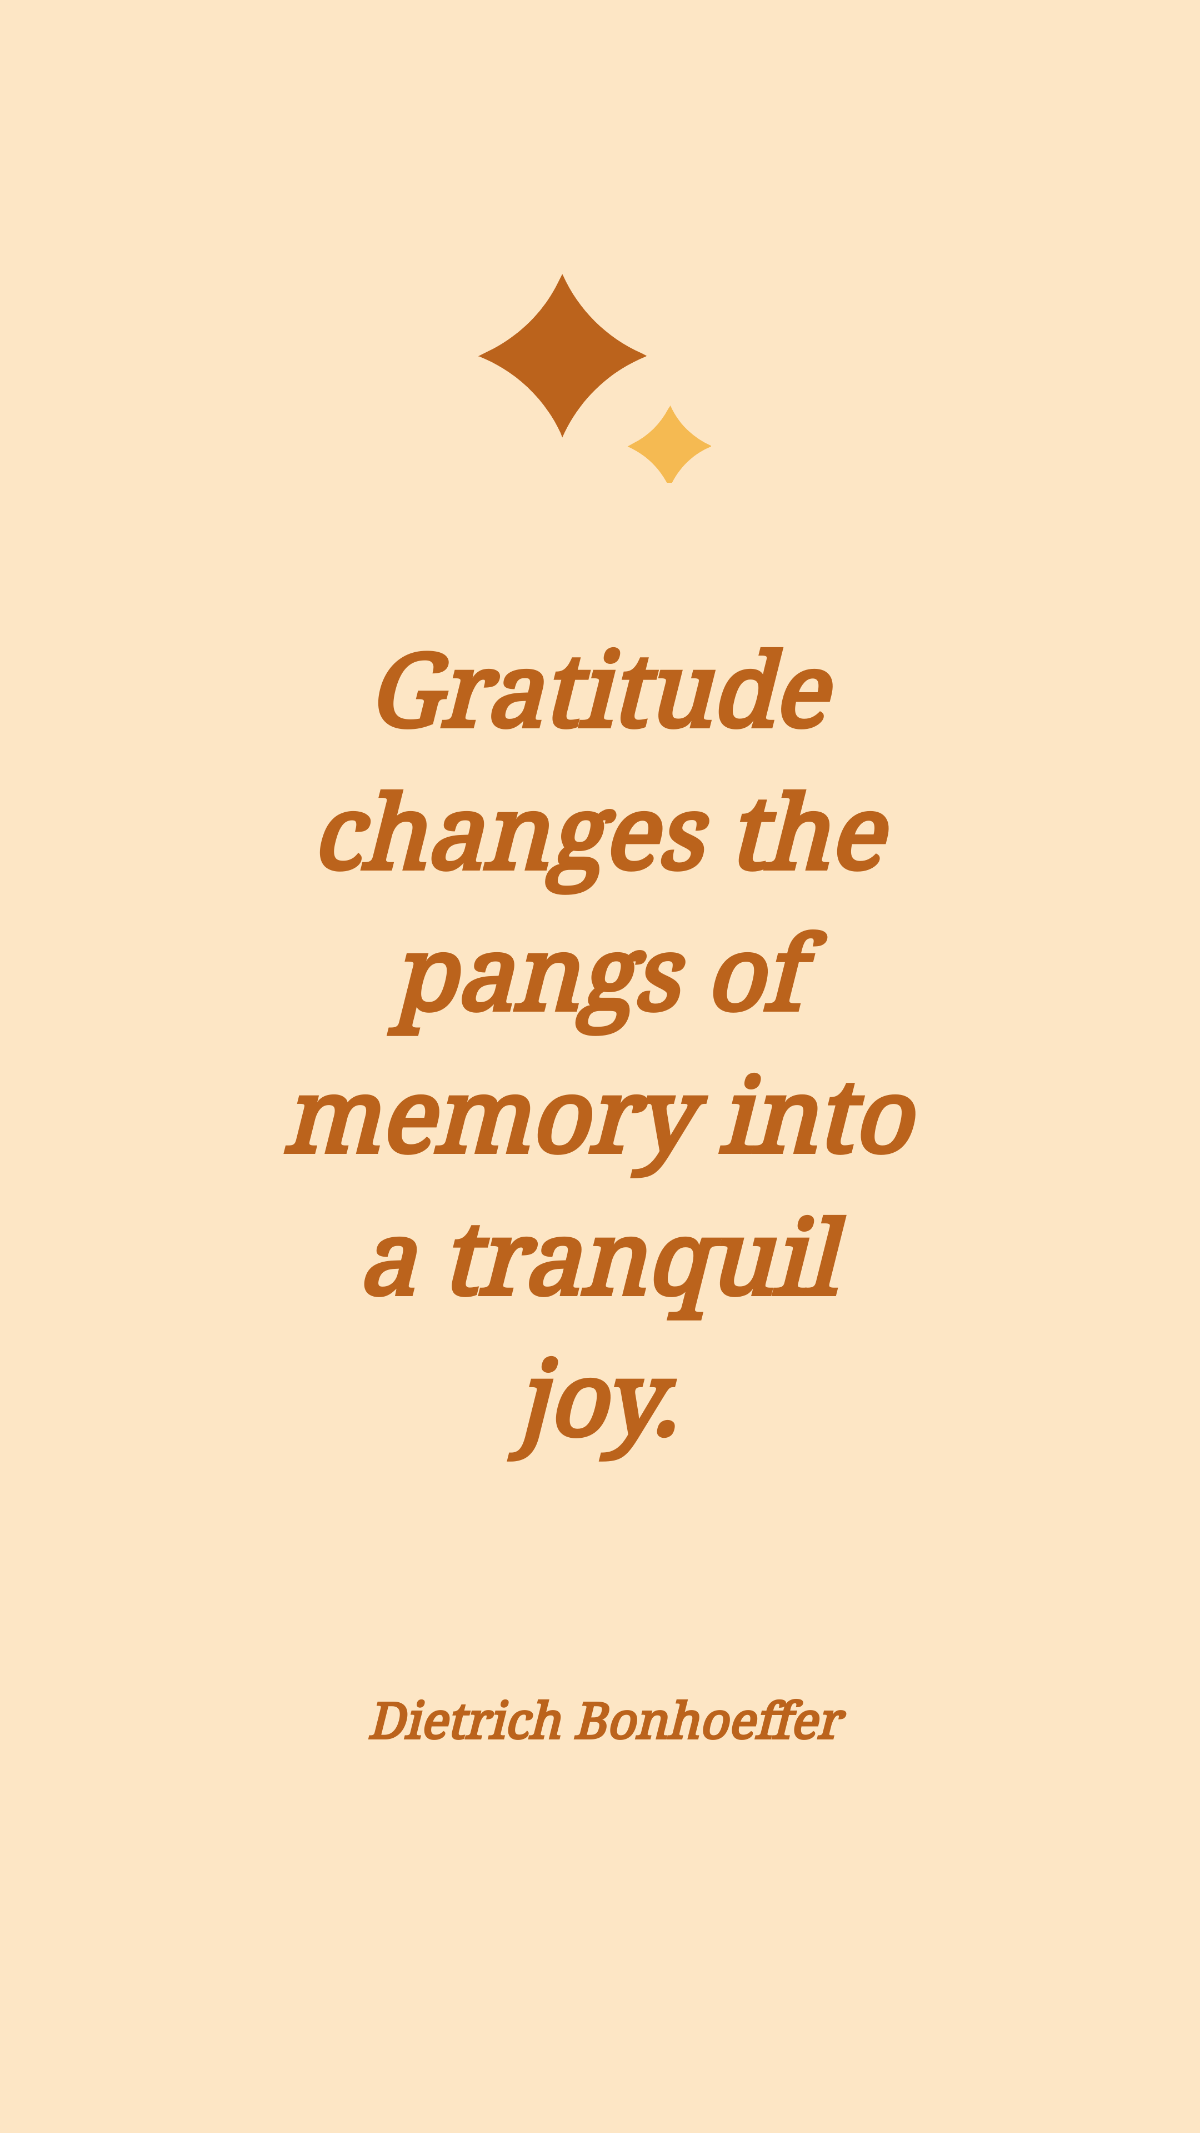 Free Dietrich Bonhoeffer - Gratitude changes the pangs of memory into a tranquil joy. Template